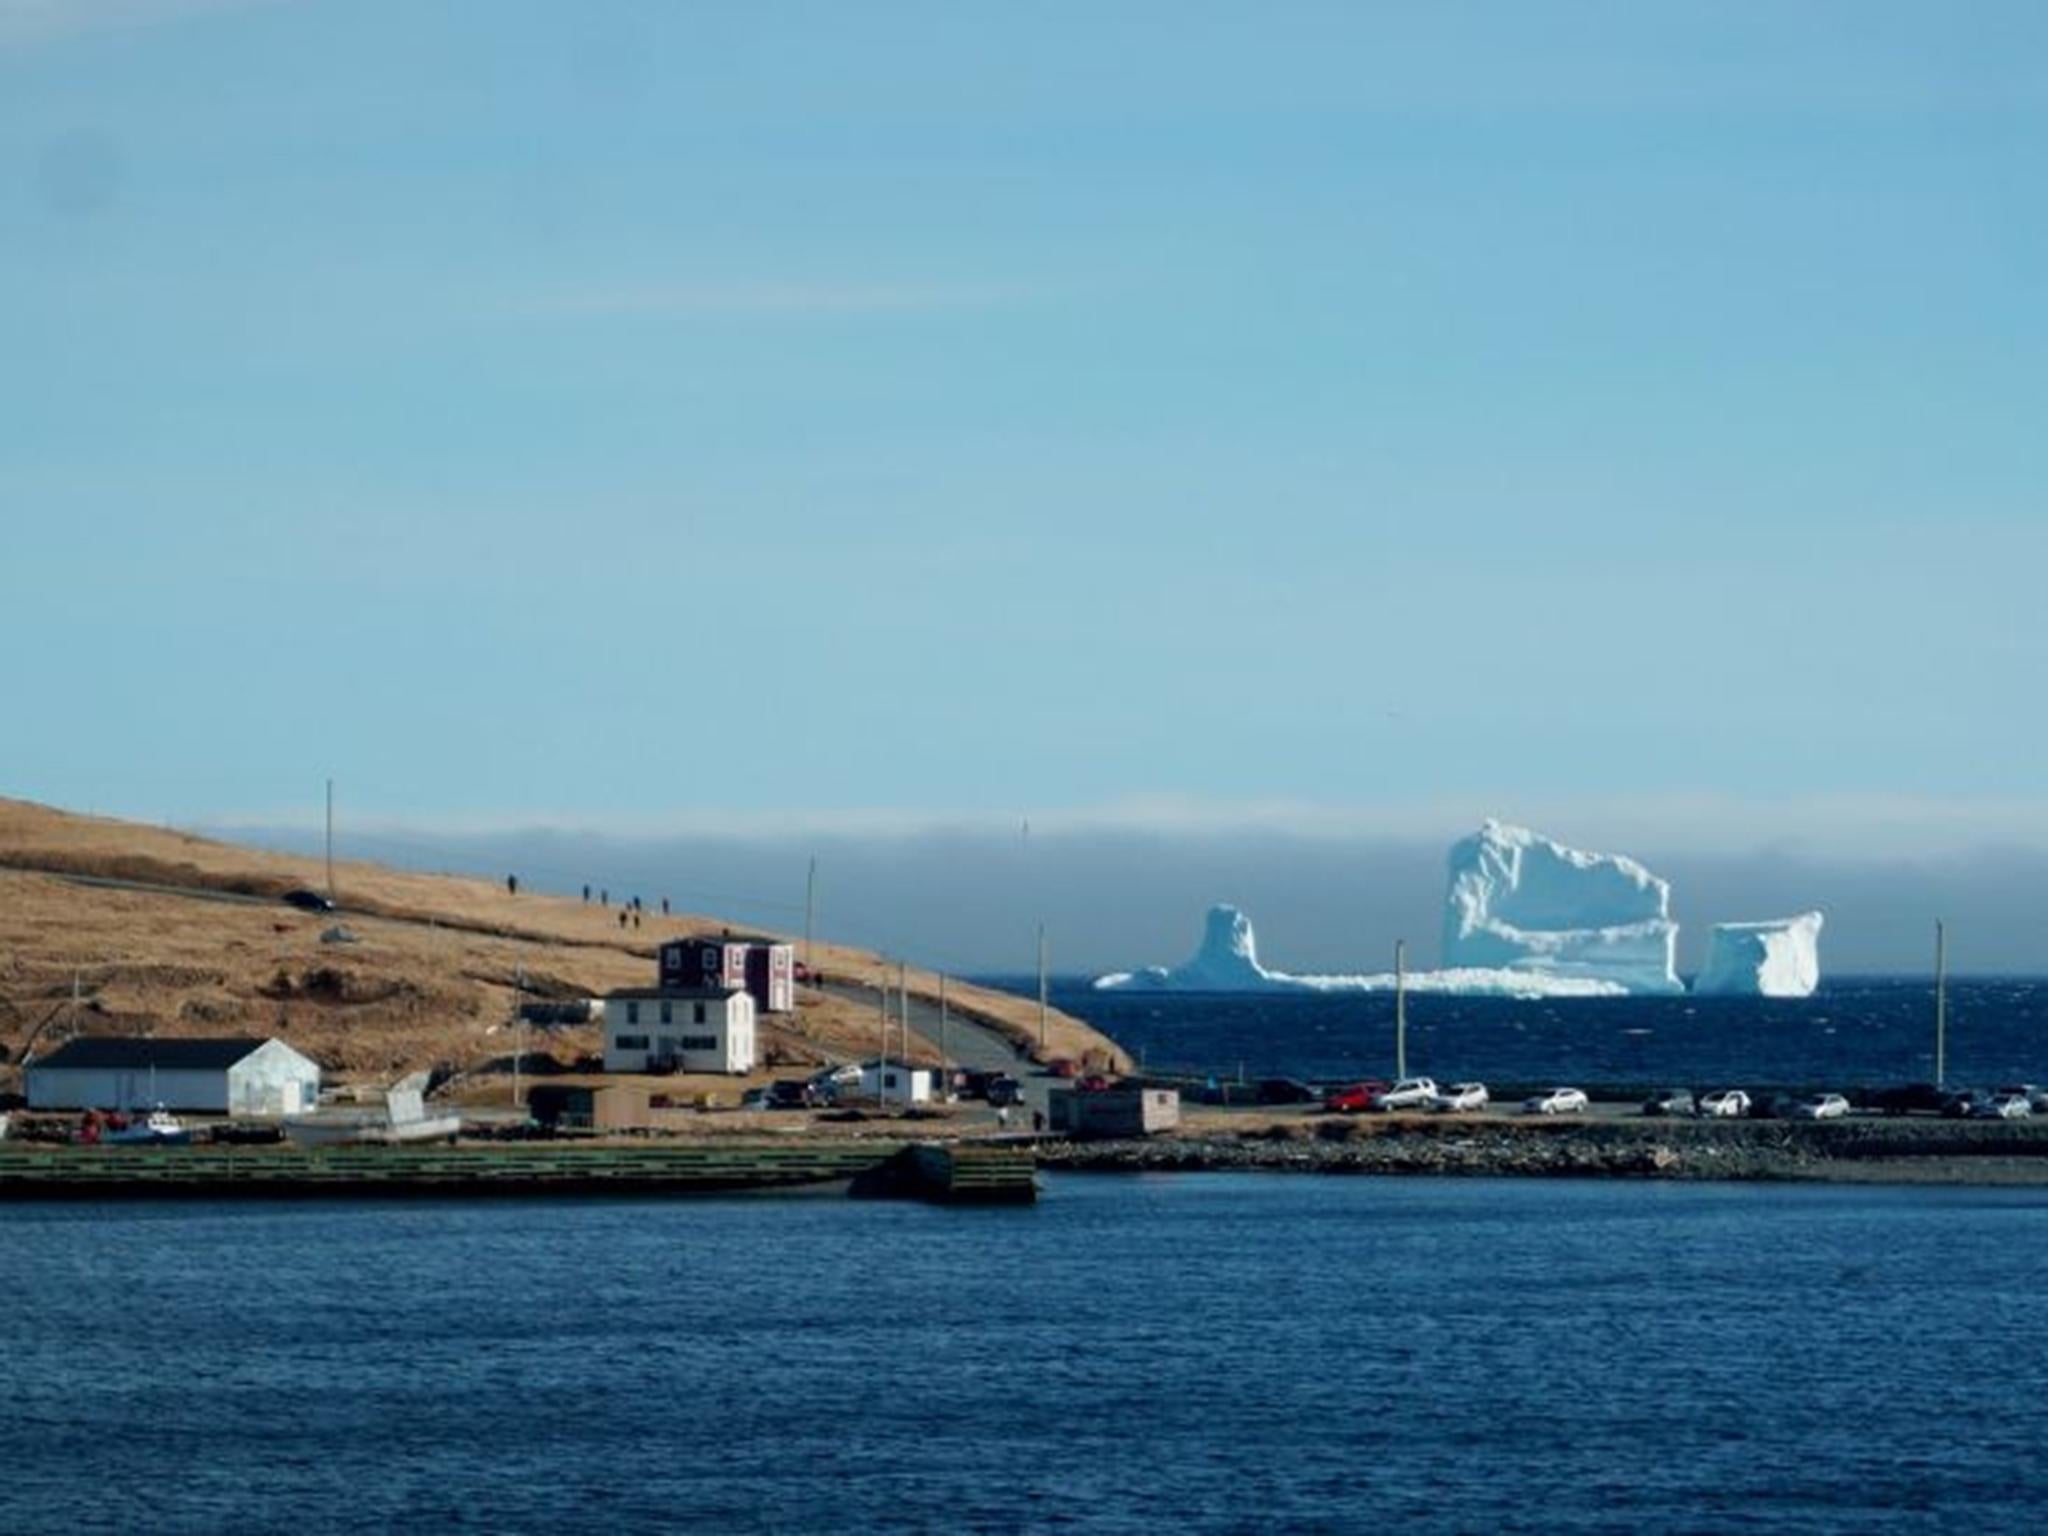 The area off the coast of Newfoundland and Labrador is known as Iceberg Alley